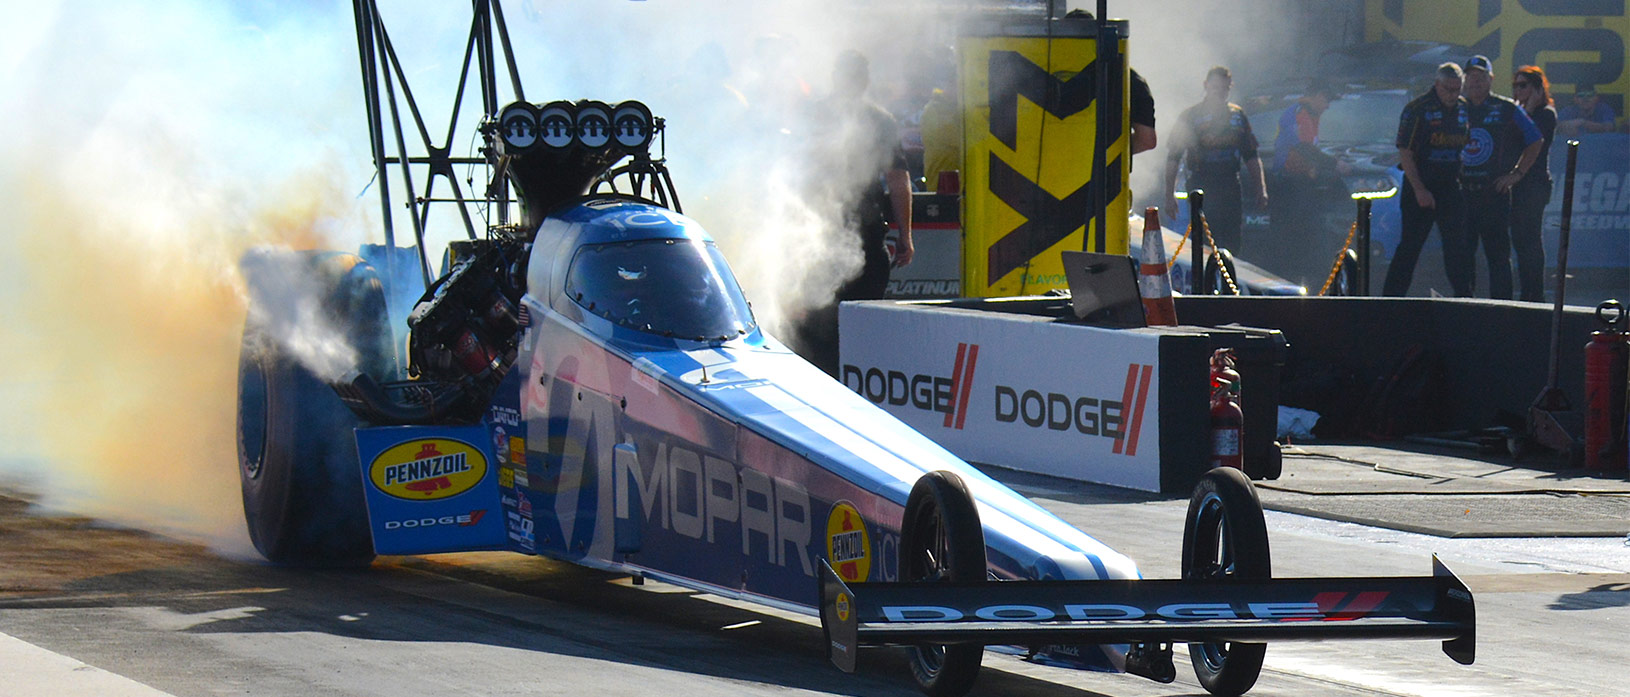 Dodge NHRA Nationals Presented By Pennzoil FRIDAY NITRO QUALIFYING SESSIONS RECAP AND GALLERY